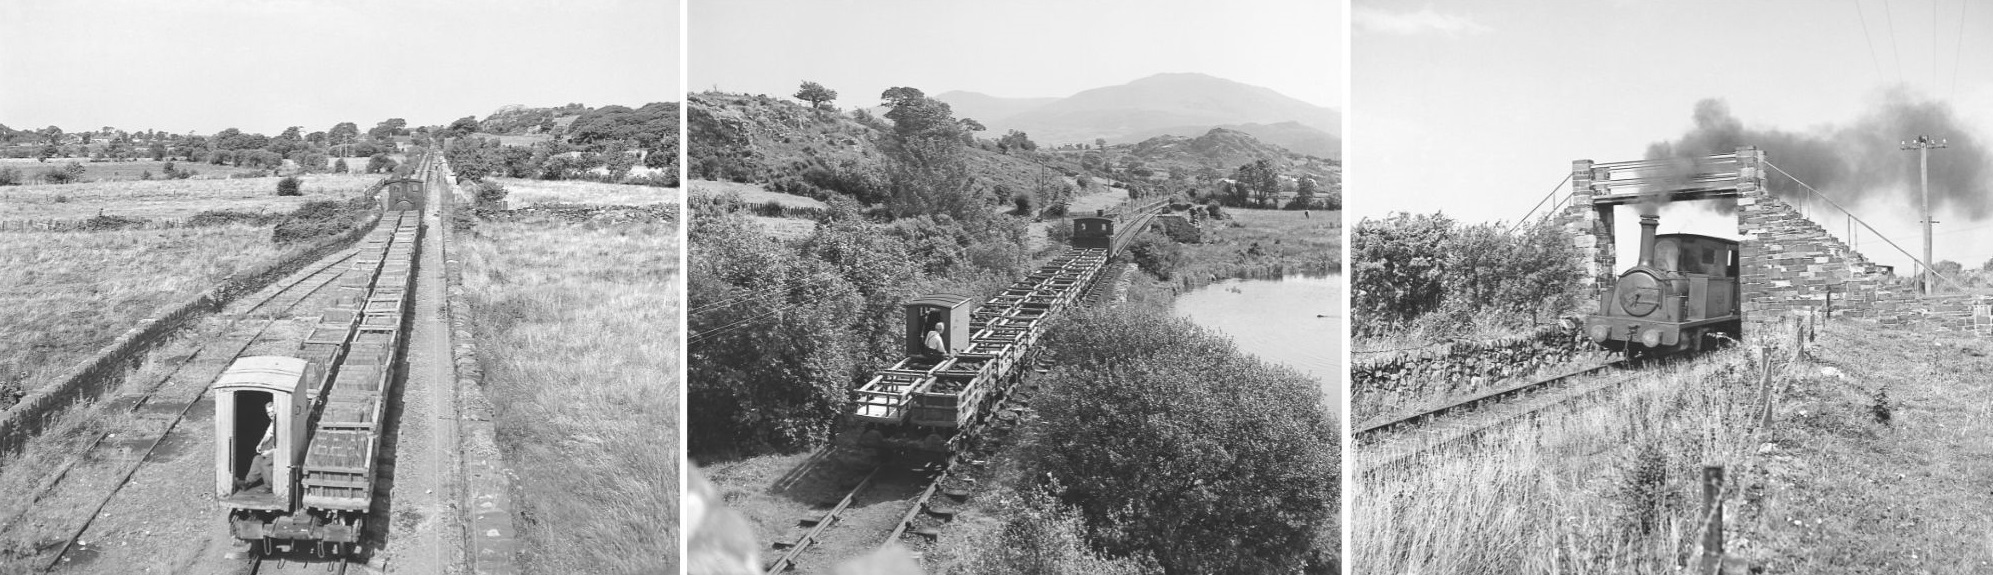 Along the along the Padarn Railway. Images courtesy of Michael Clemens